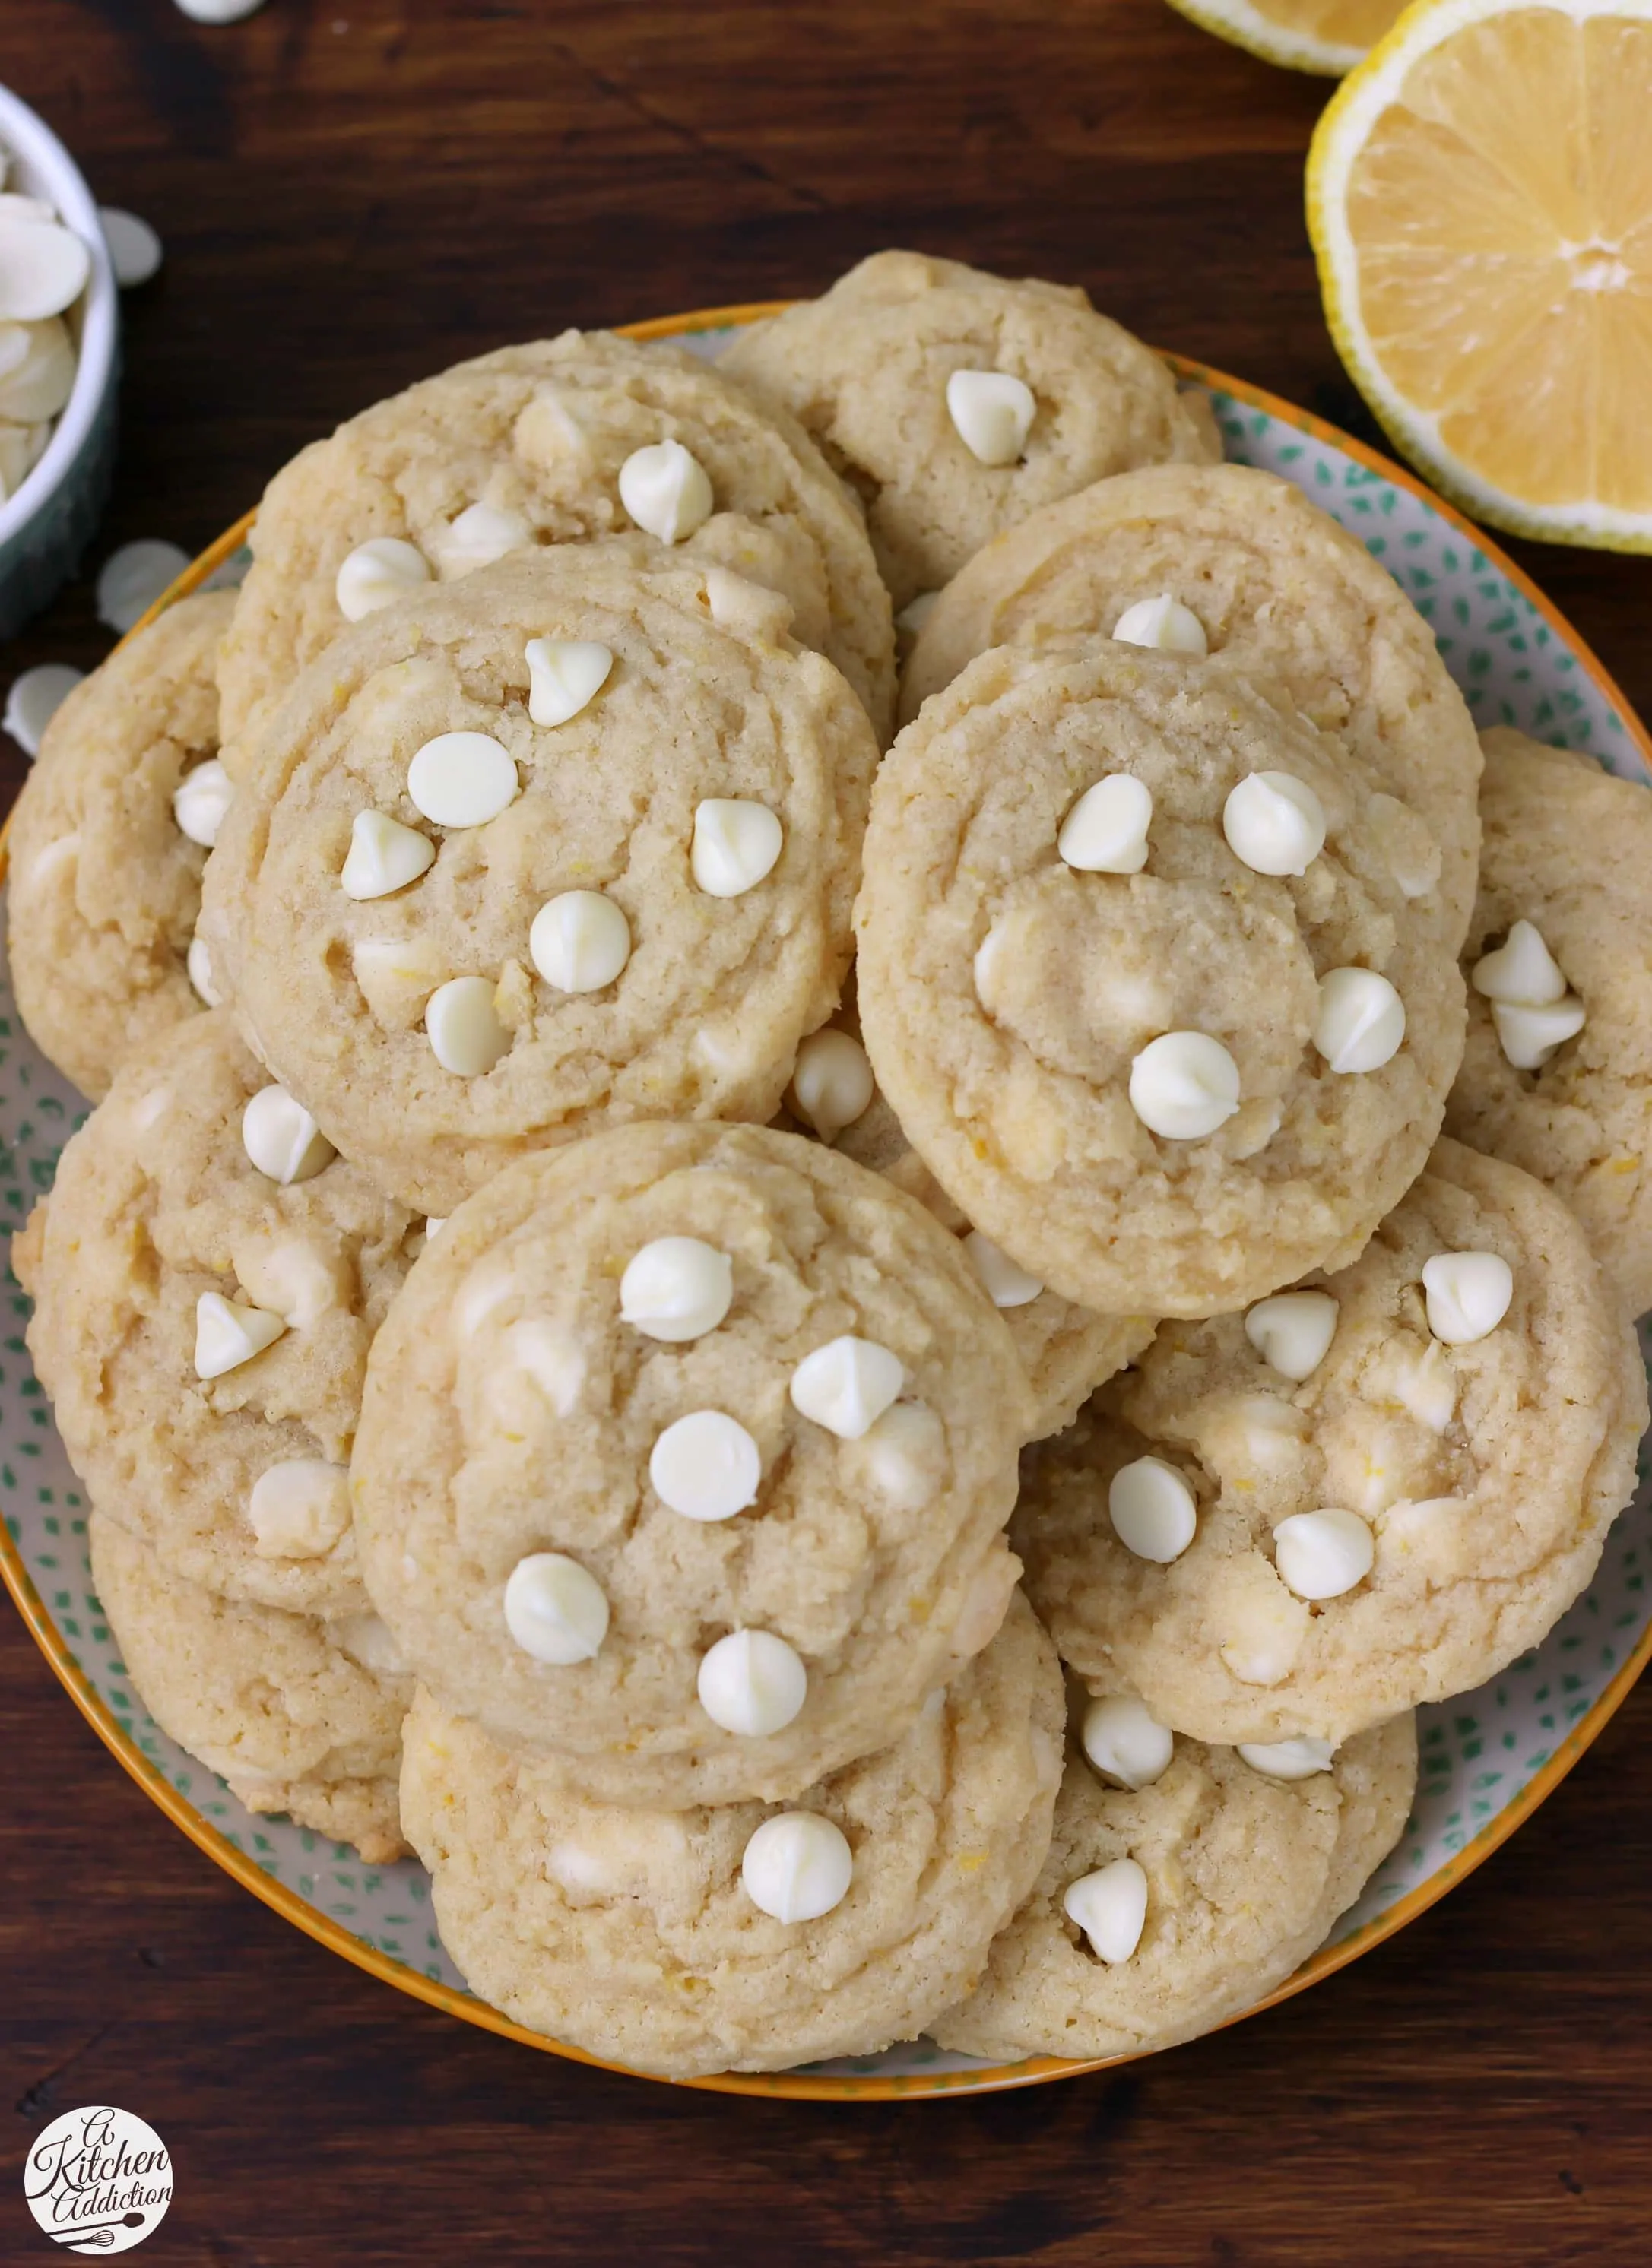 https://www.a-kitchen-addiction.com/wp-content/uploads/2016/03/chewy-white-chocolate-lemon-cookies-vert-above-w-name.jpg.webp